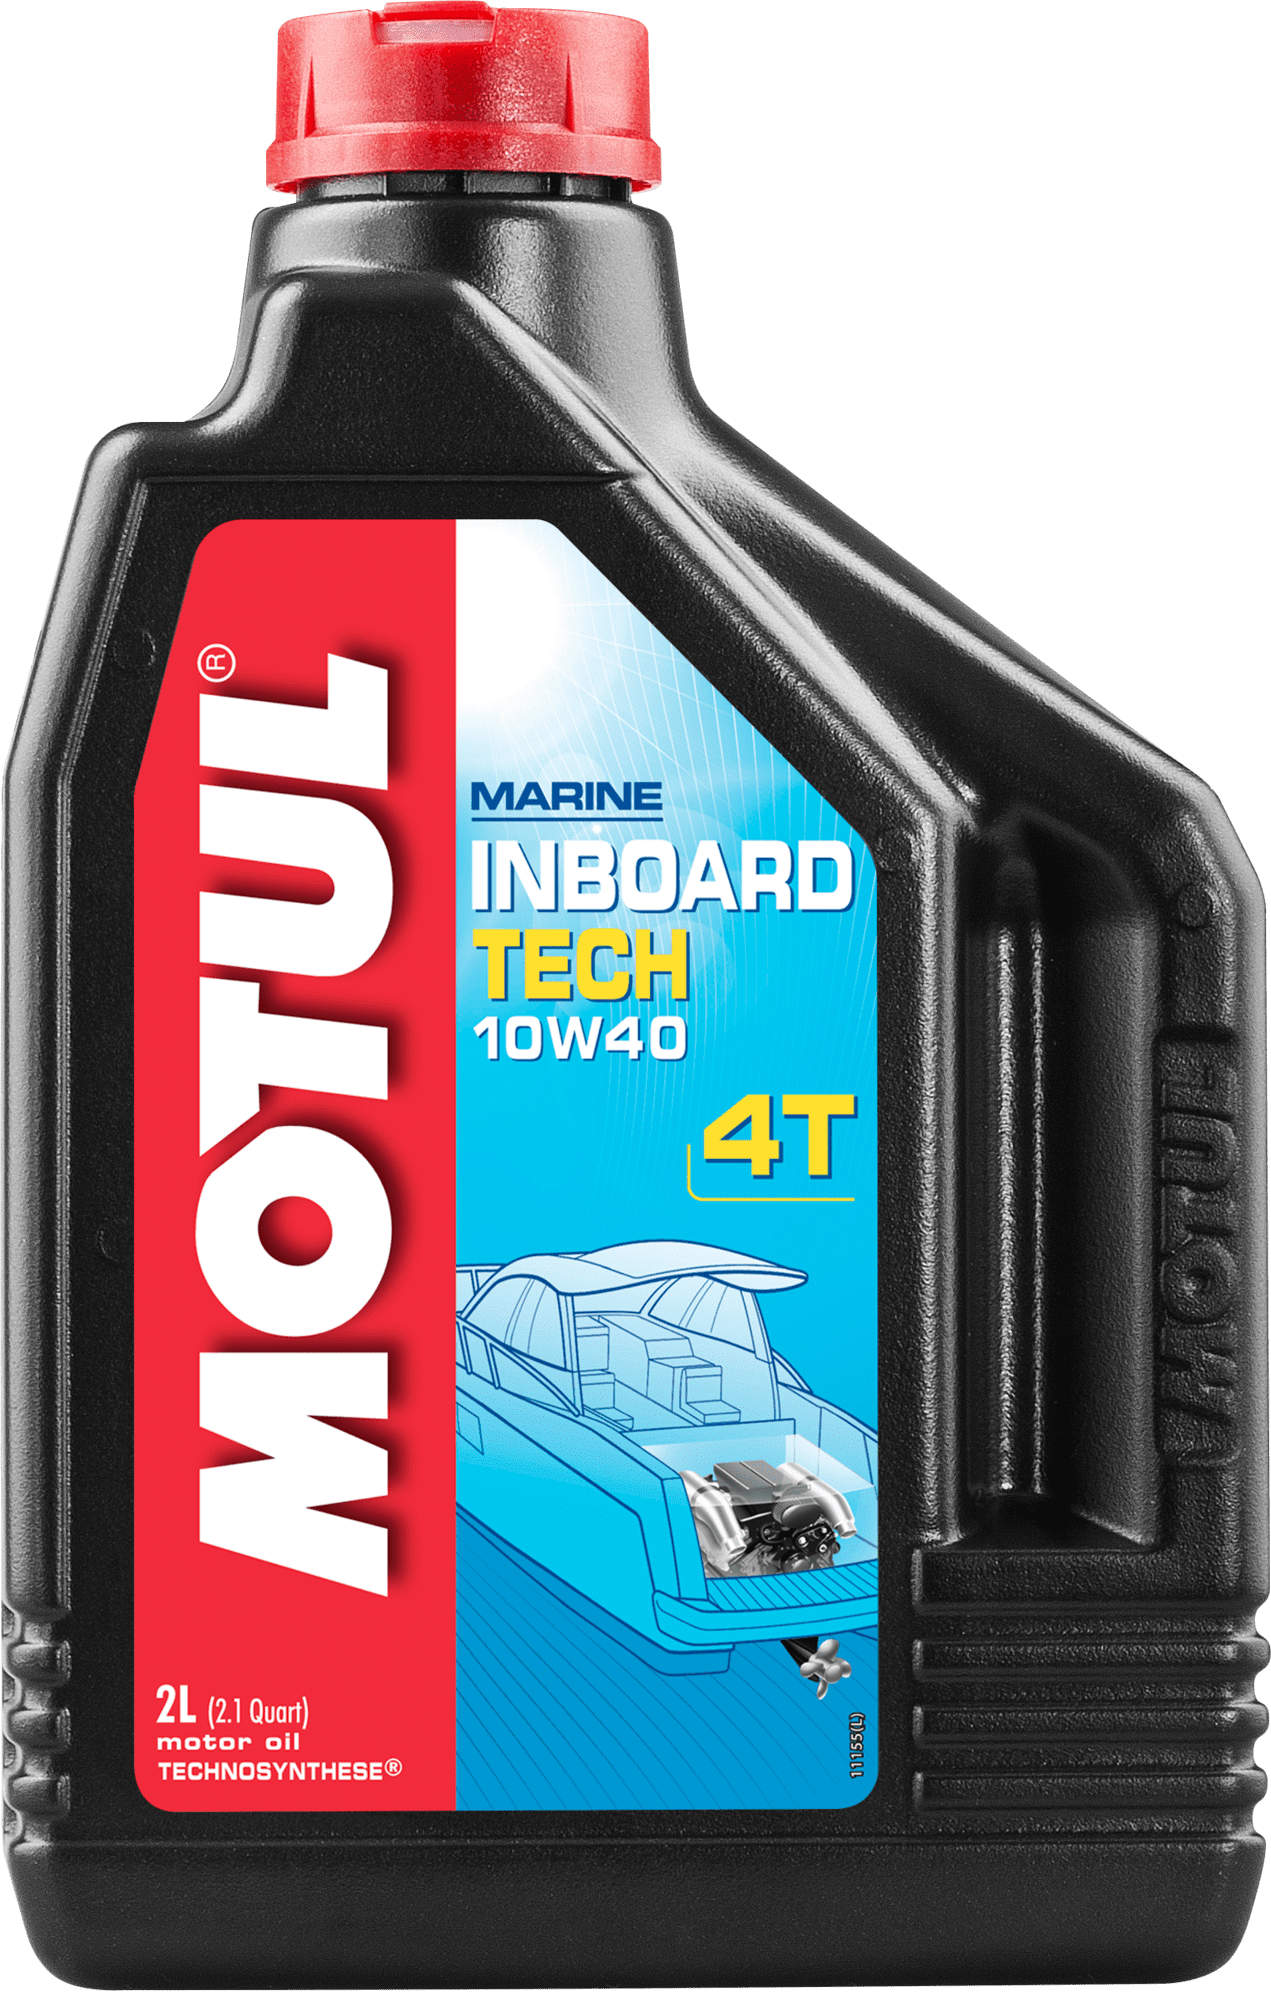 106417-2 Technosynthese® lubricant for 4-Stroke Inboard engines.